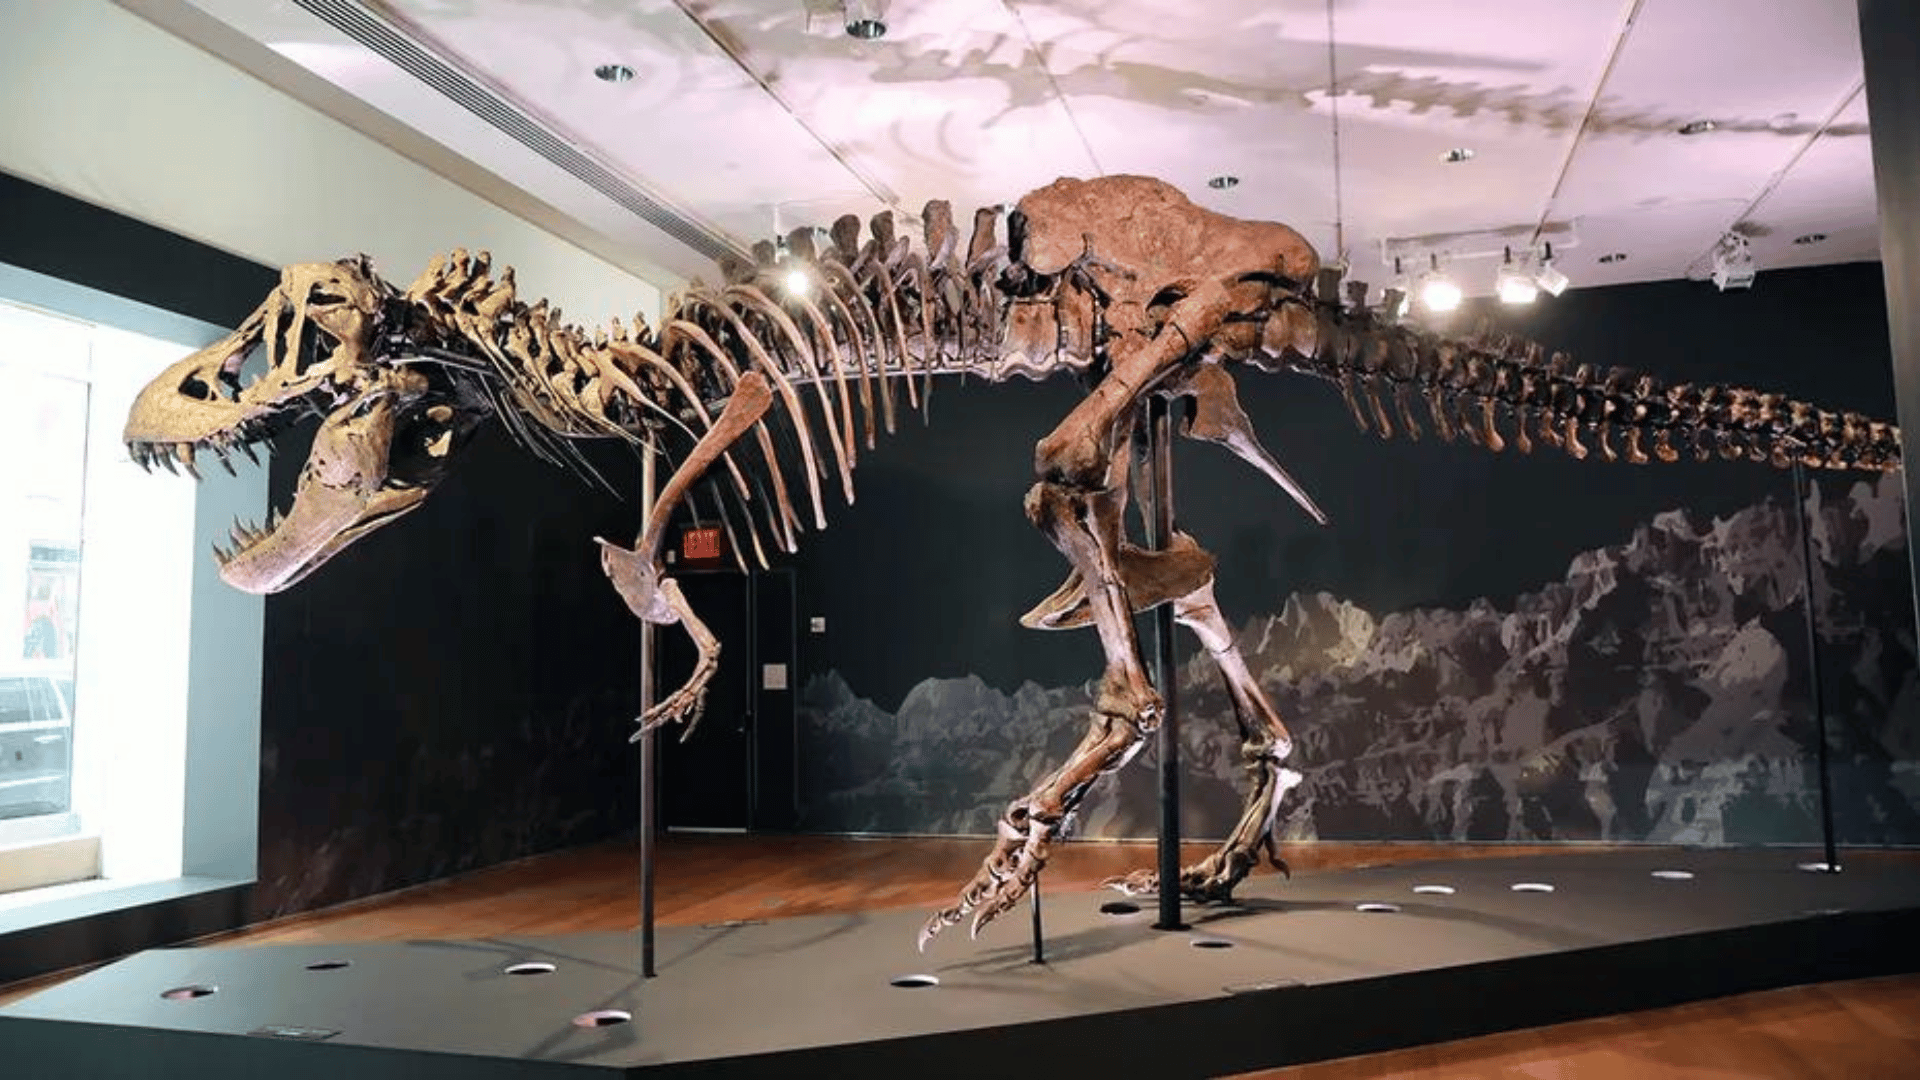 A Tyrannosaurus rex dinosaur fossil skeleton is displayed in a gallery at Christie’s Auction House in New York City. (Spencer Platt:Getty Images)